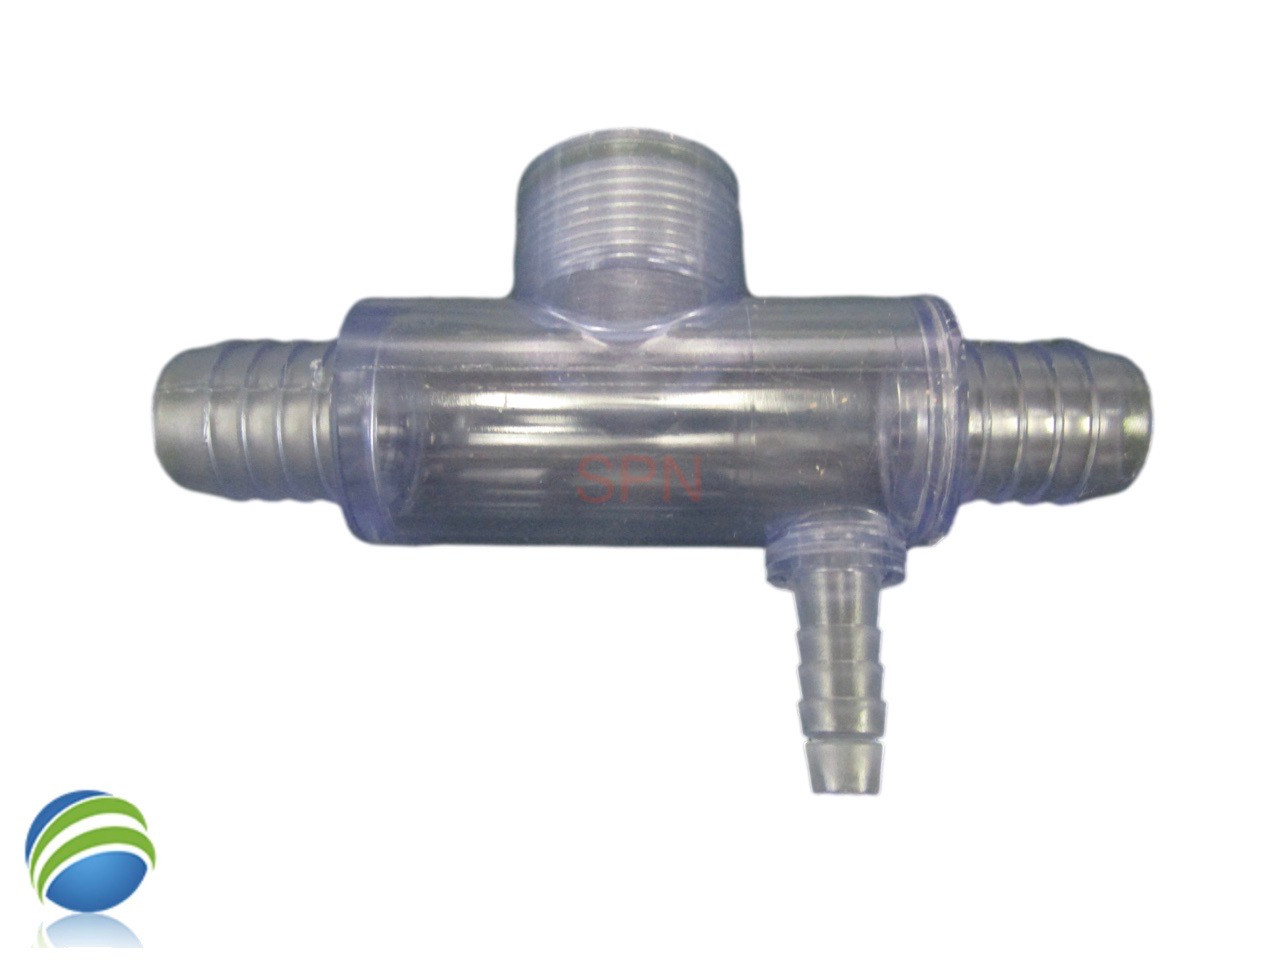 Flow Switch Tee Housing, Sundance and Jacuzzi Premium Replacement, 3/4" Barb x 3/4" Barb x 3/8" Barb